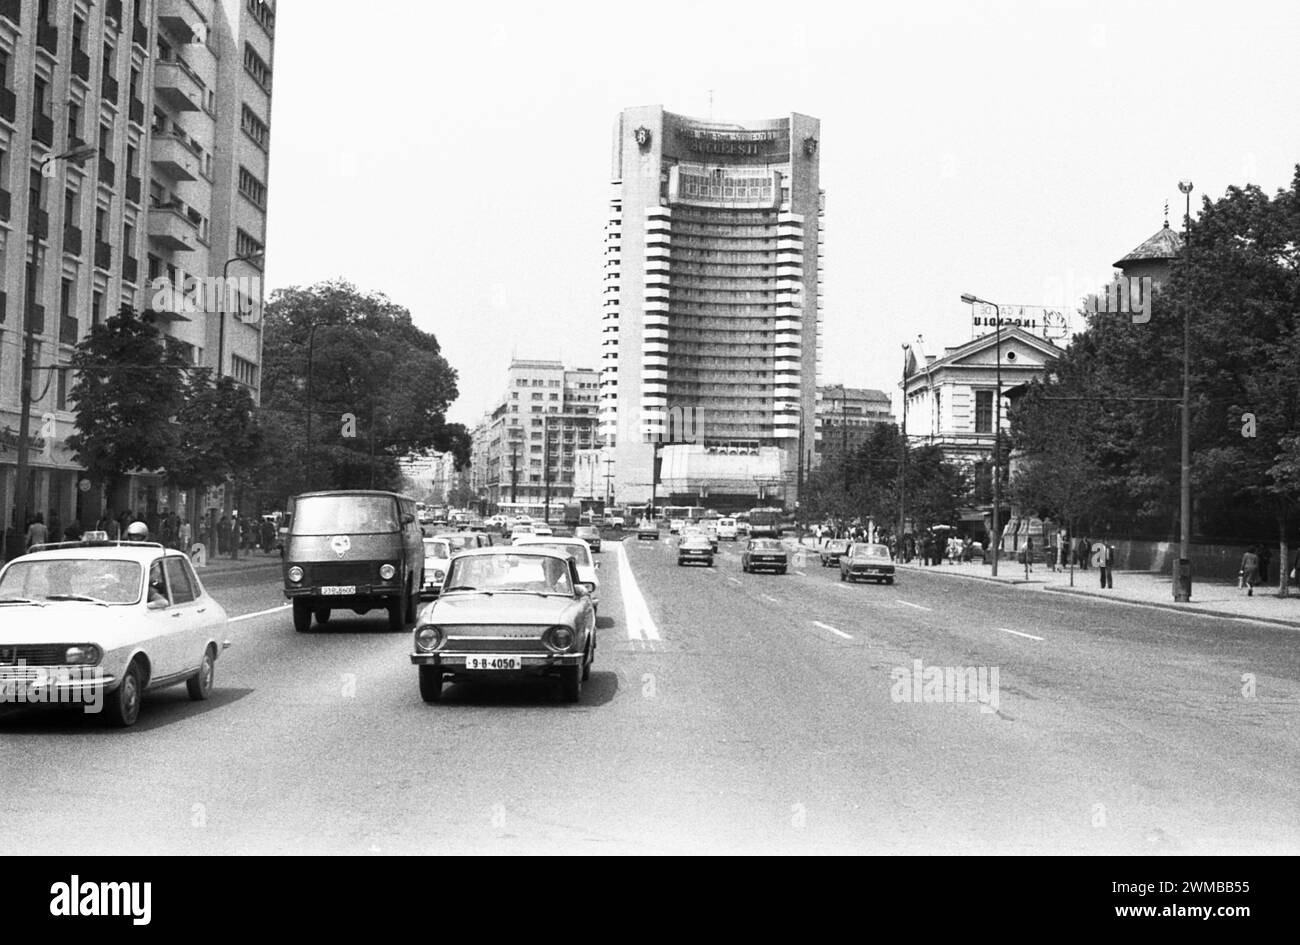 Bucharest, Romania, approx. 1980.  Vehicles driving on Boulevard I.C. Bratianu through the University Square, with the Intercontinental Hotel seen in the back. Stock Photo